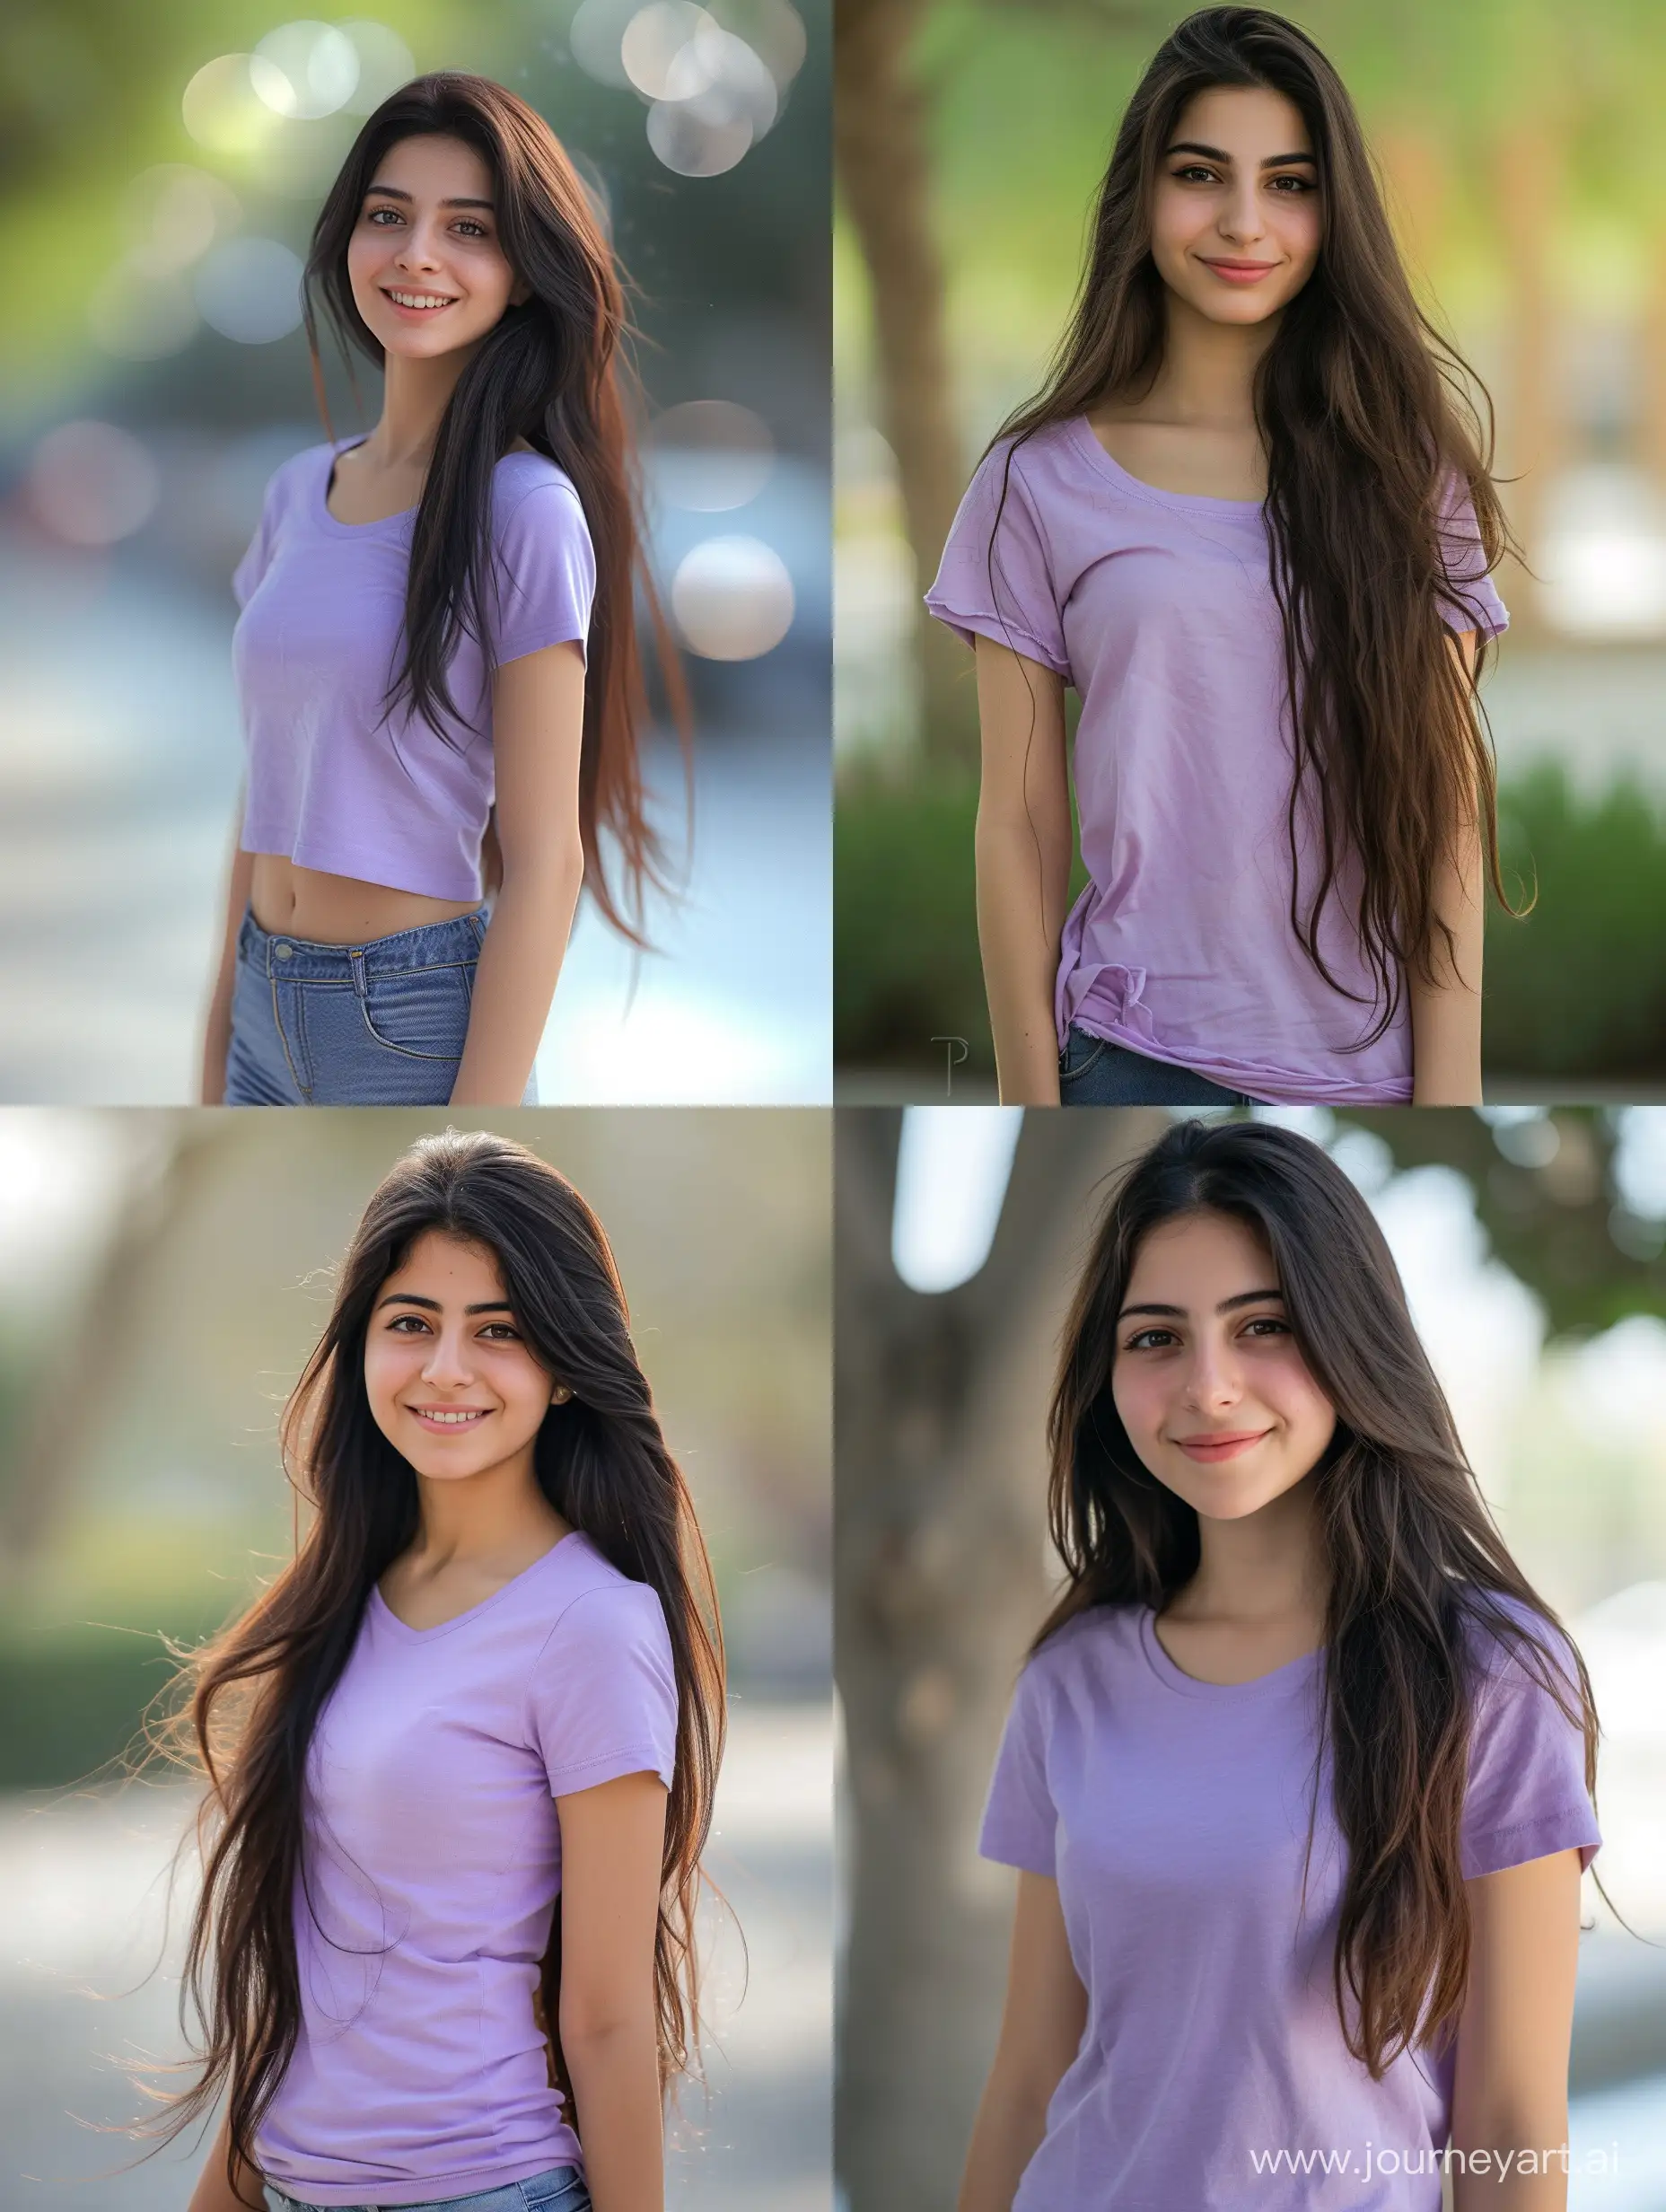 a pretty Iranian girl standing, she has dark brown long hair, hot lilac short shirt, happy face, blur background, ultra high detailed photo, full body pose photography,
